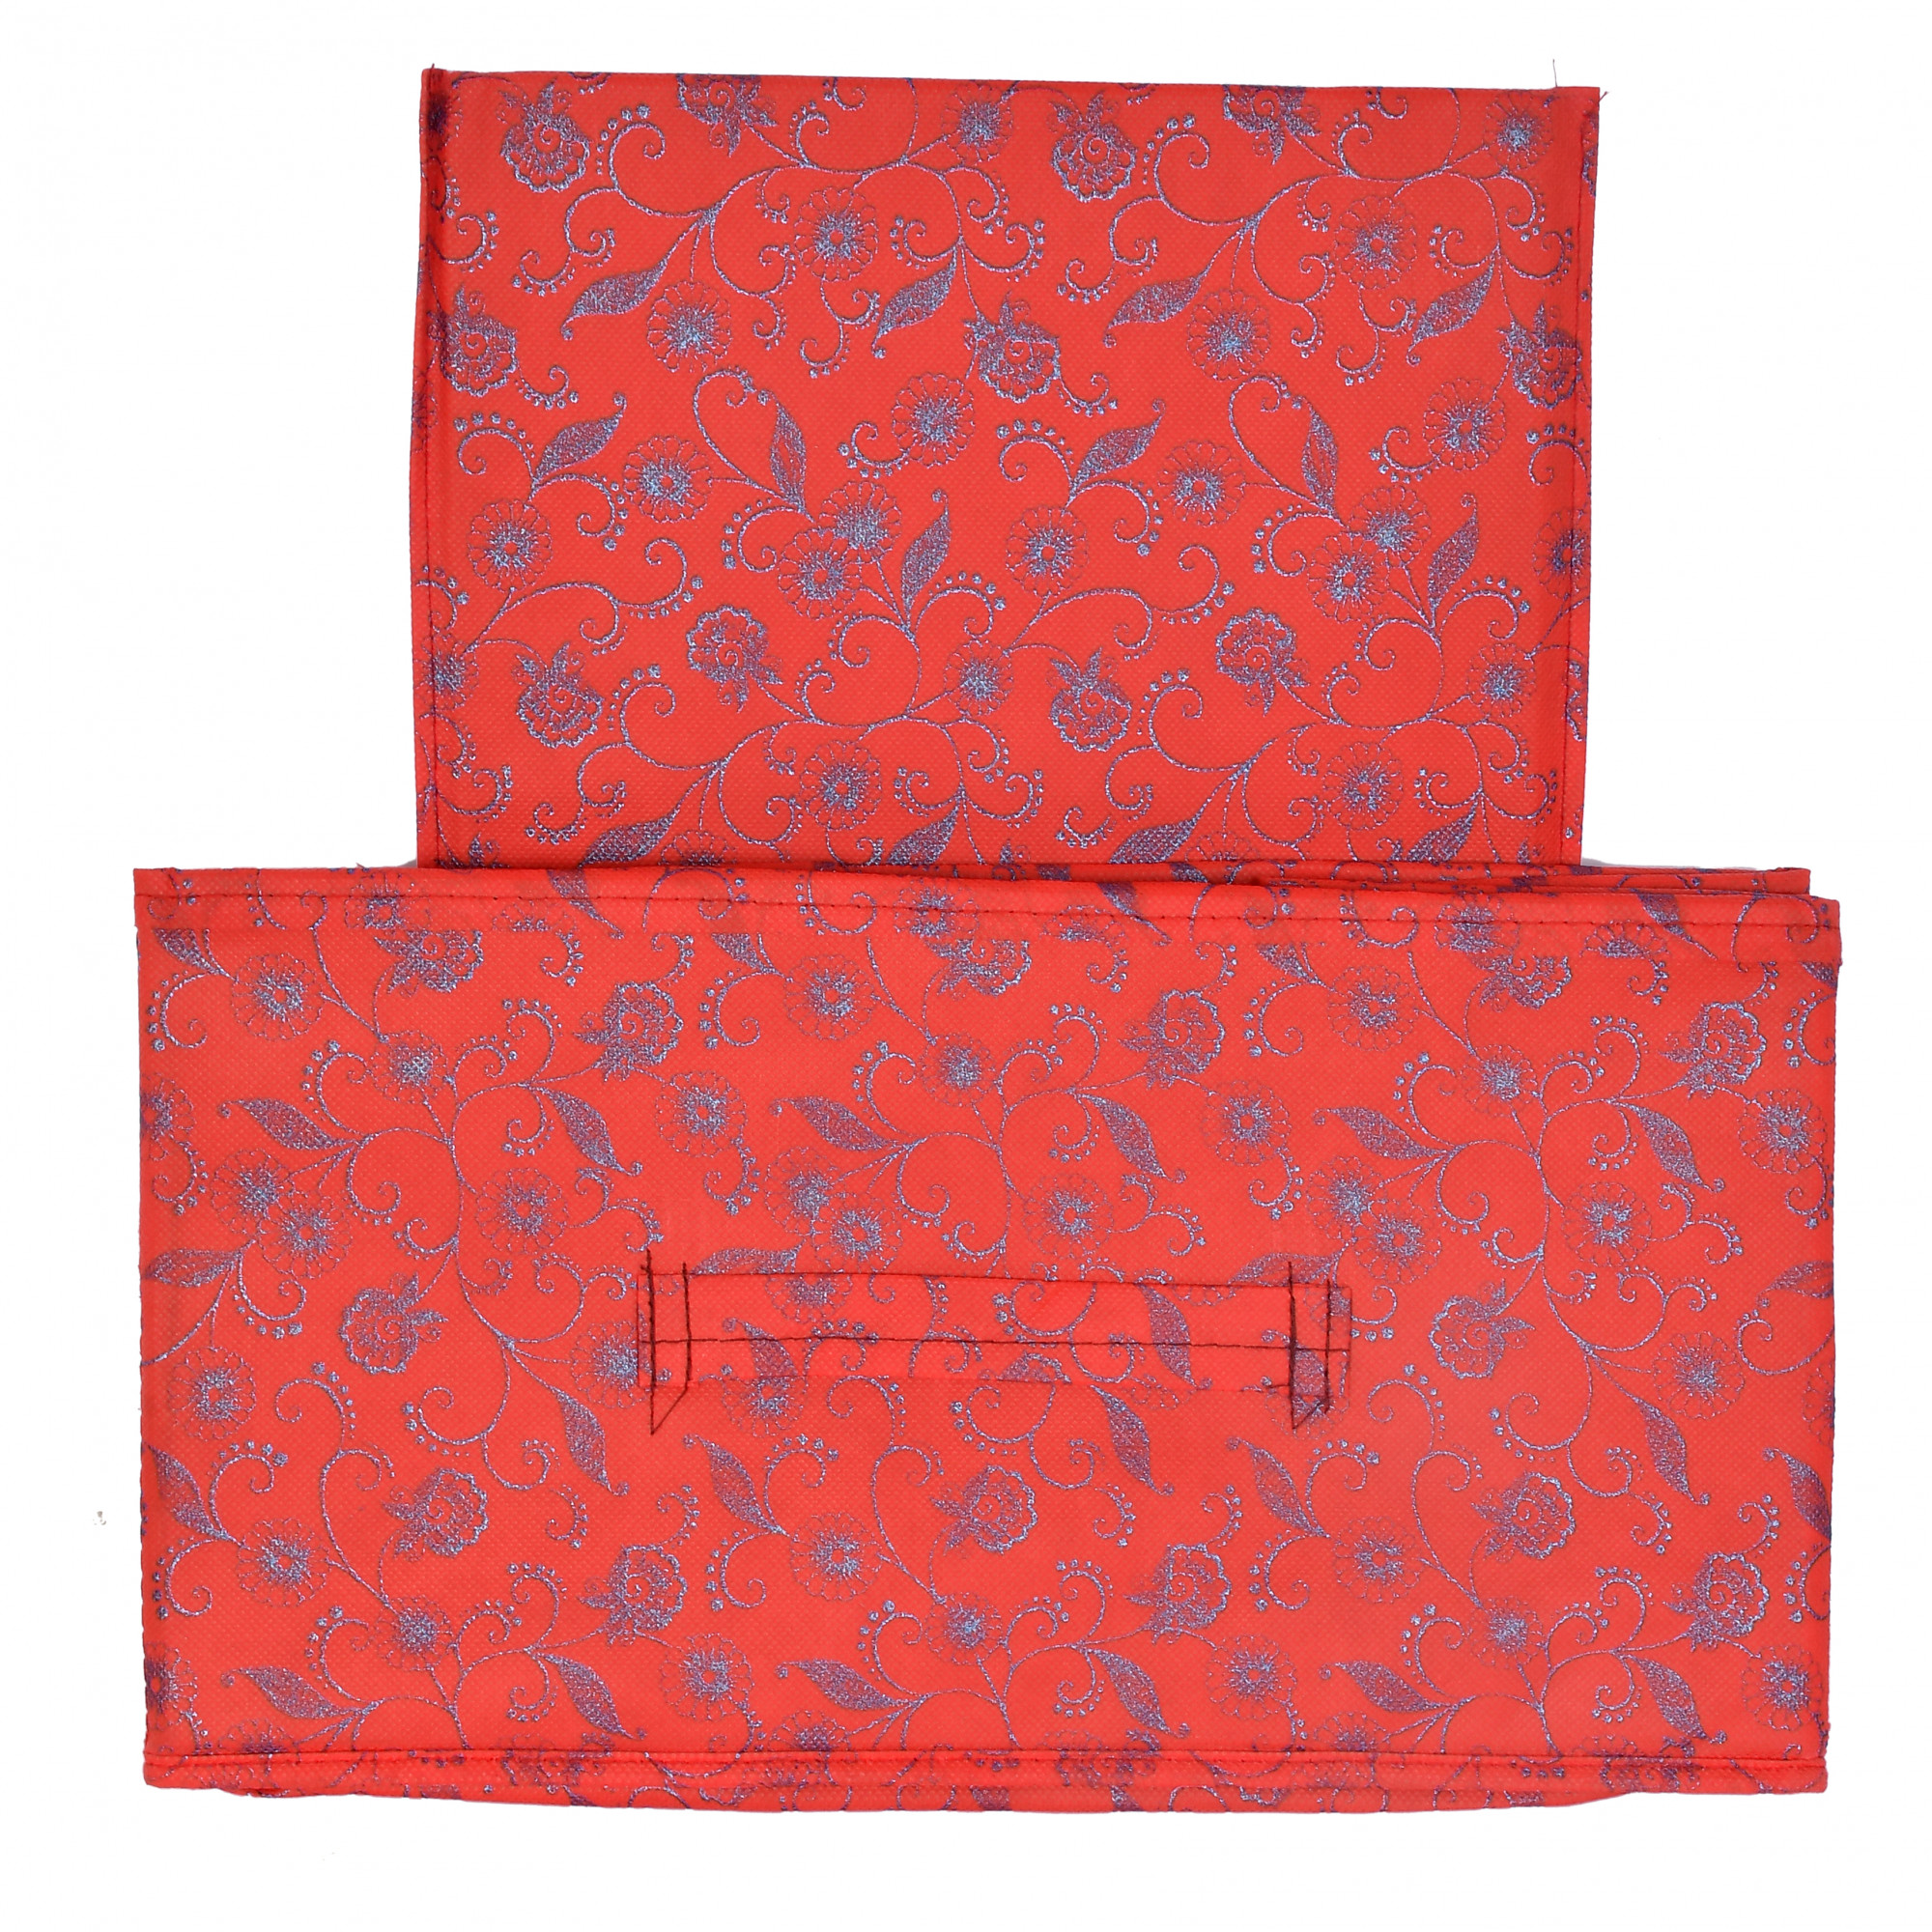 Kuber Industries Metalic Floral Print Non Woven Fabric Replacement Drawer Storage And Cloth Organizer Unit for Closet (Red)-KUBMART3488